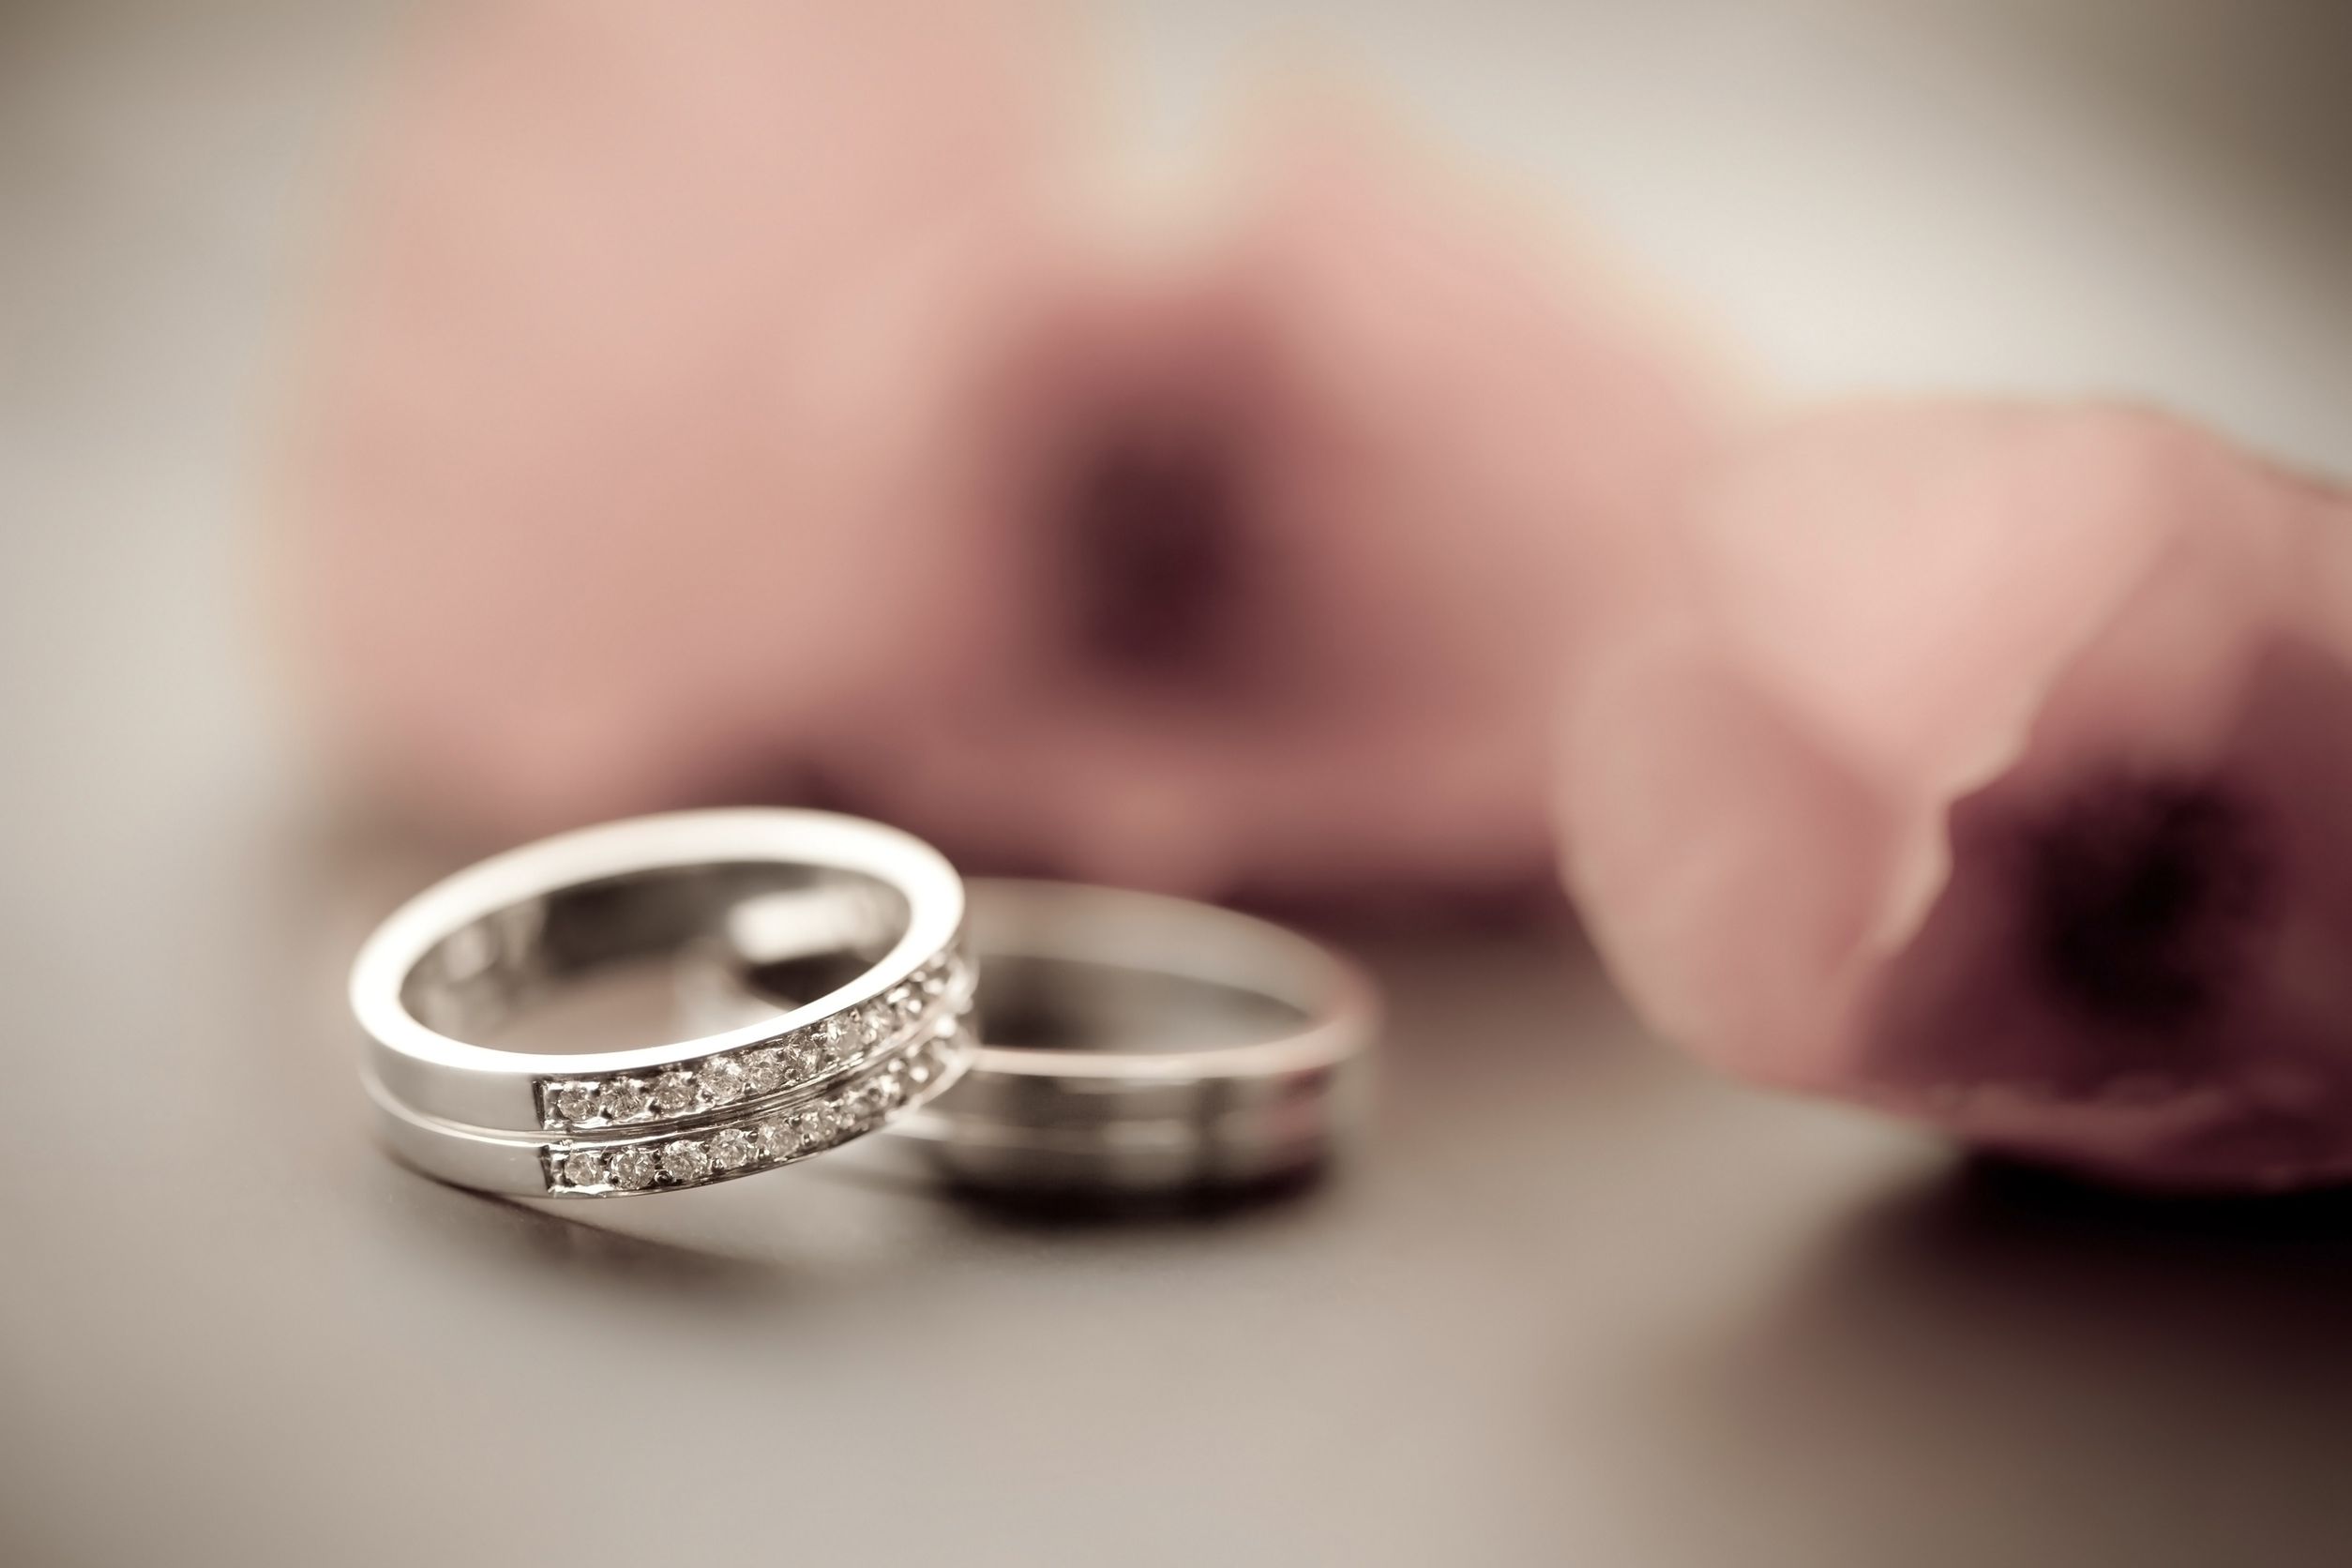 Planning on Getting Engaged in Indiana This Christmas? You’ll Need Rings!